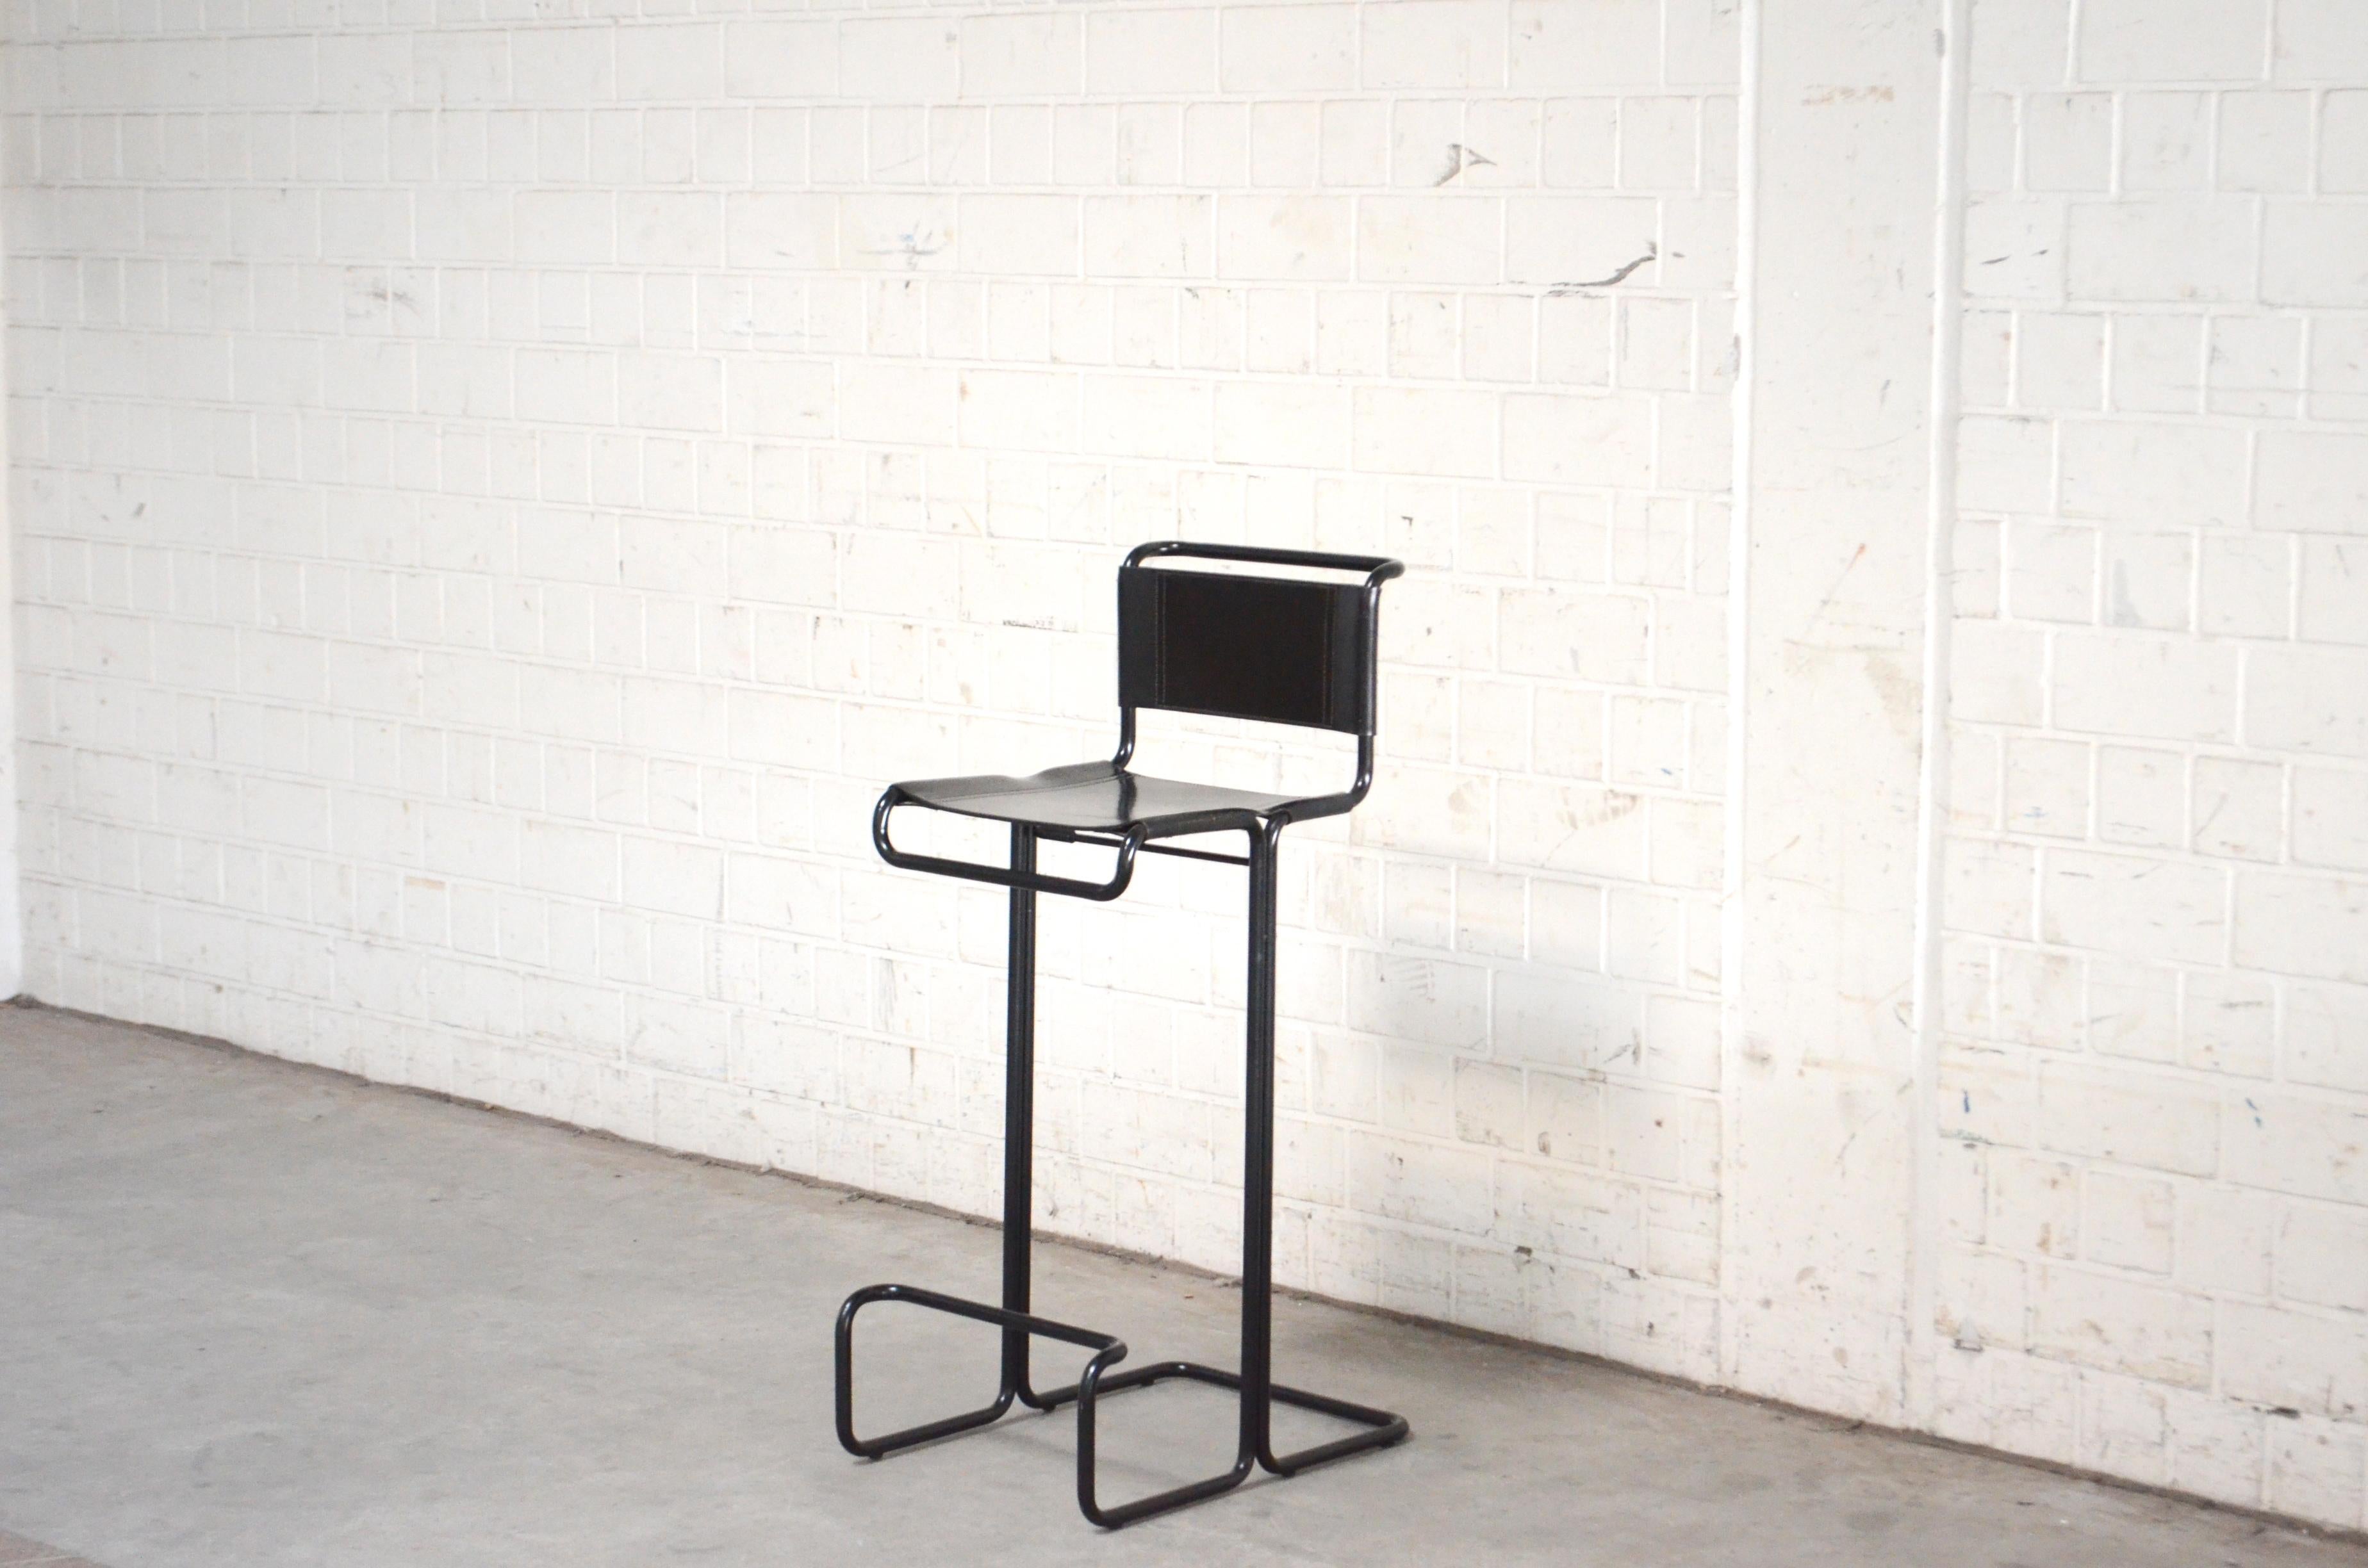 This Barstool was manufactured by Fasem in Italy.
It is a high cantilever chair with black tubesteel and saddle leather.